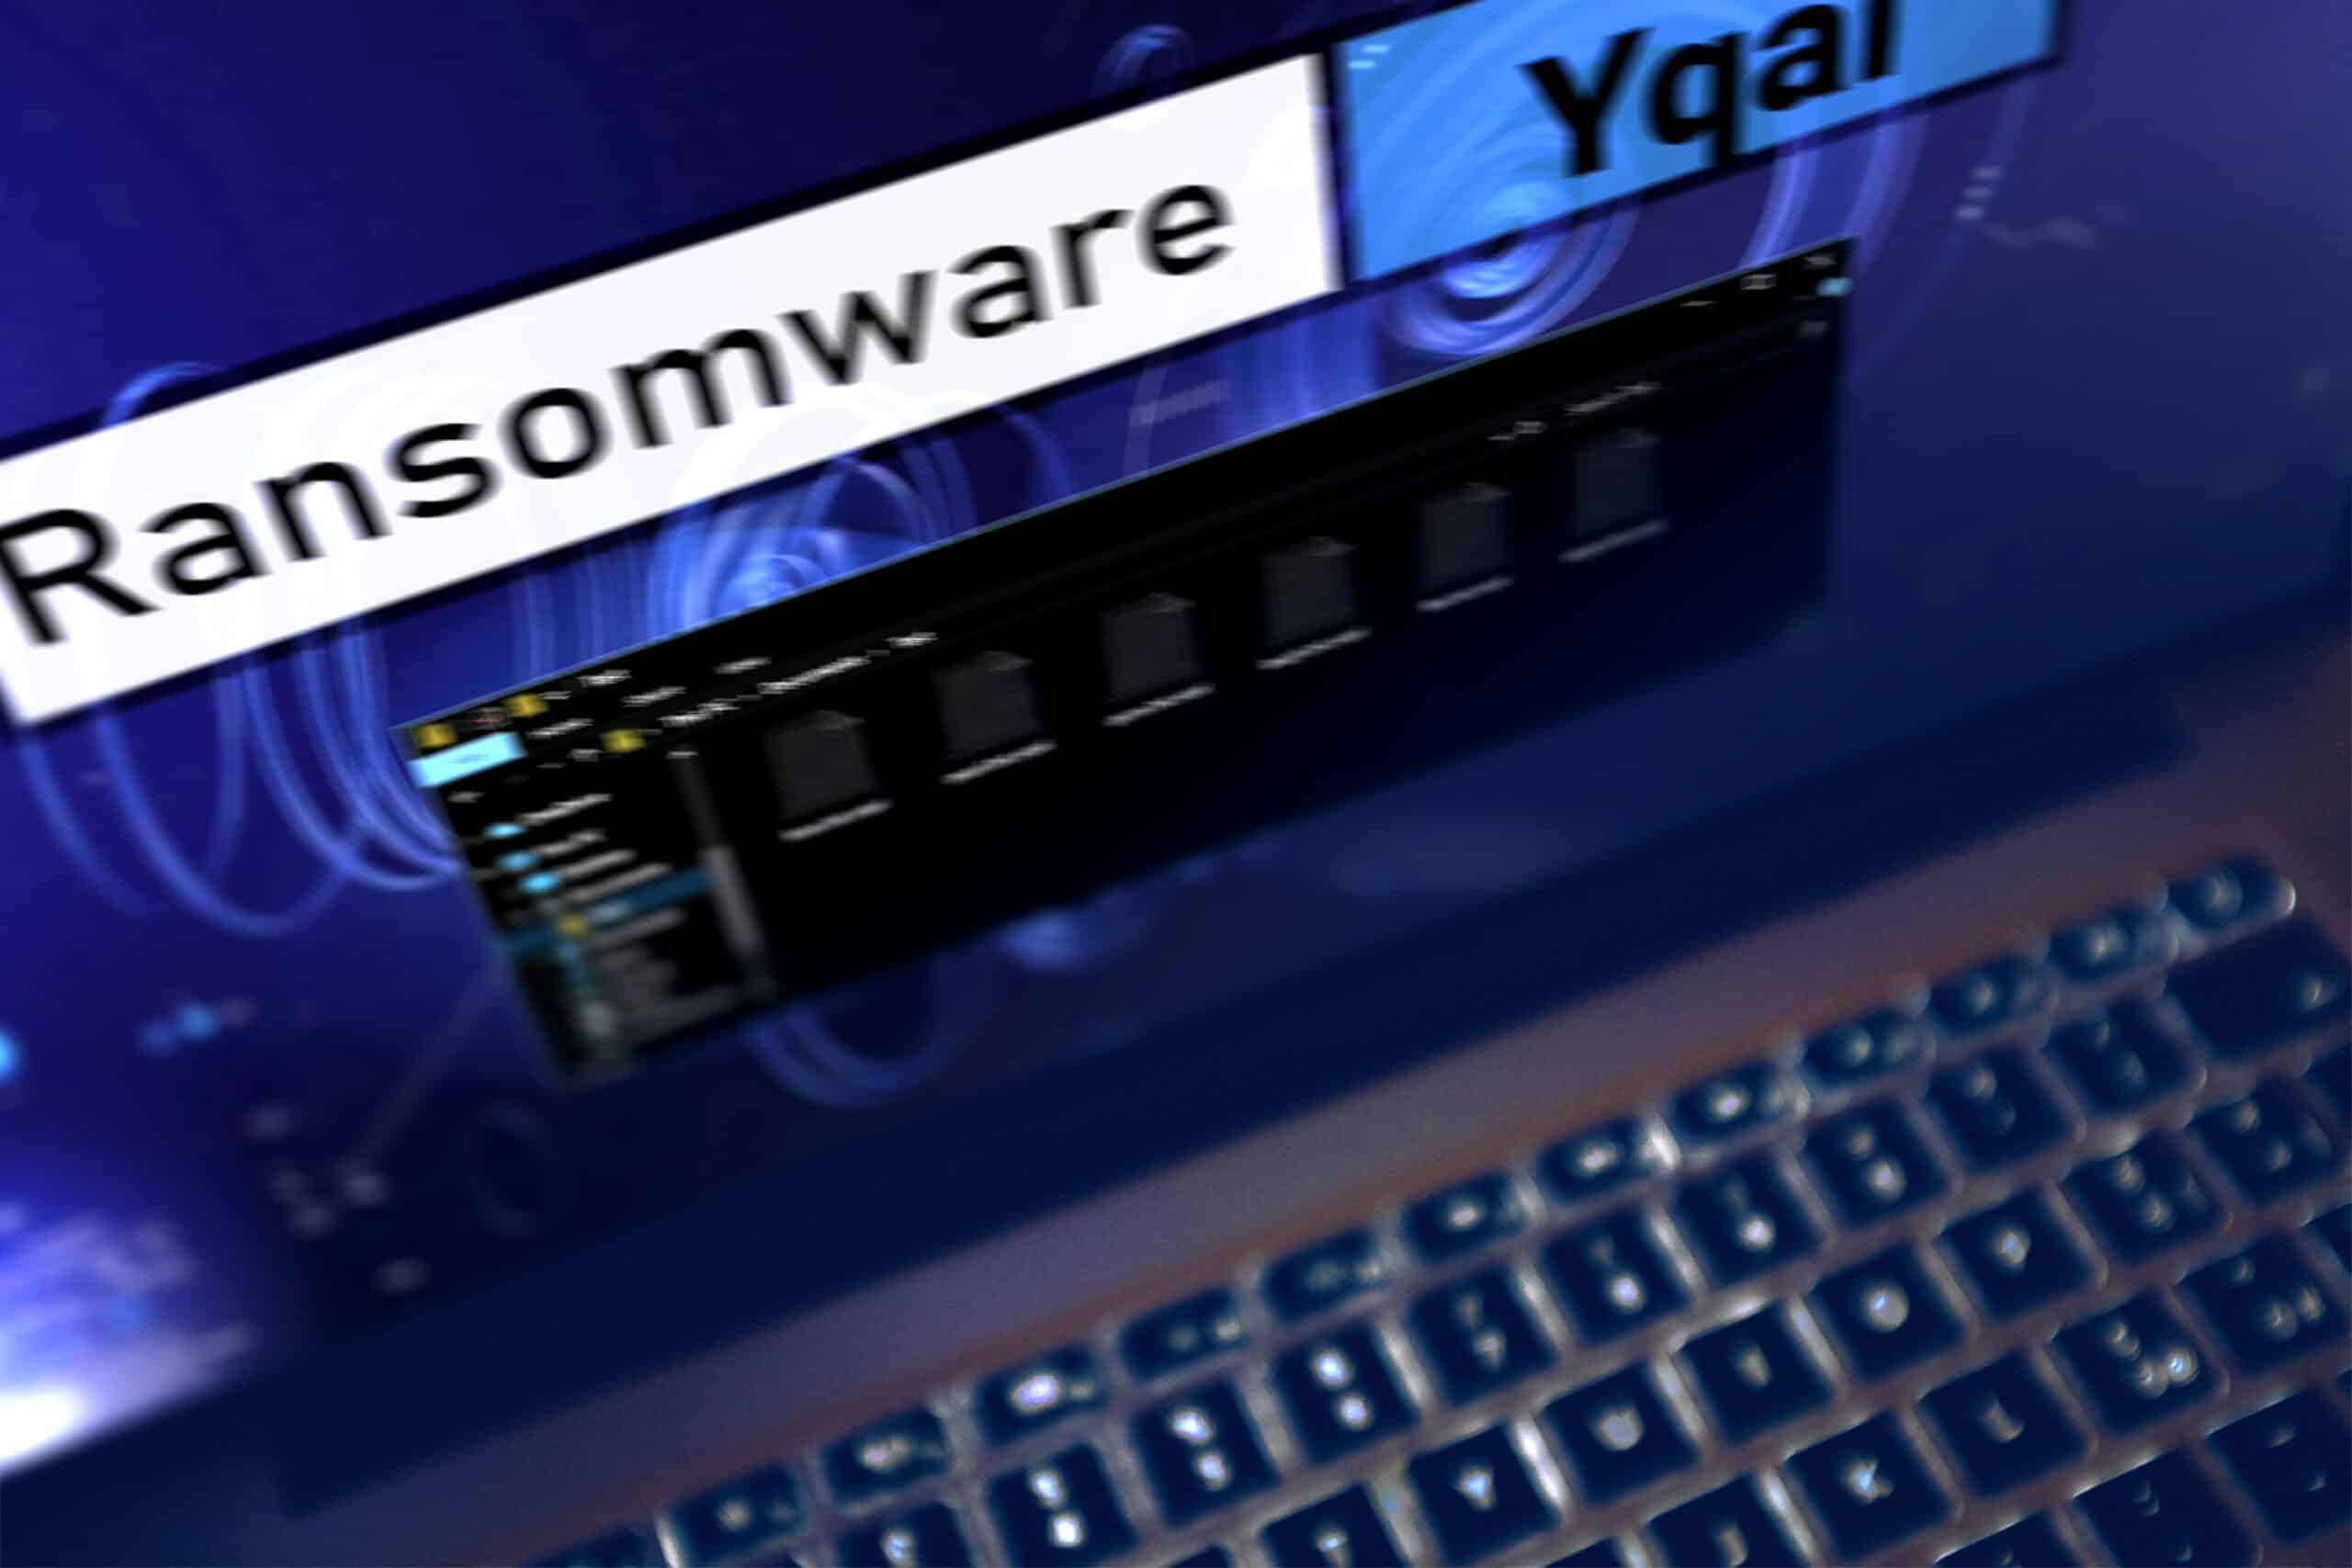 Ransomware Yqal